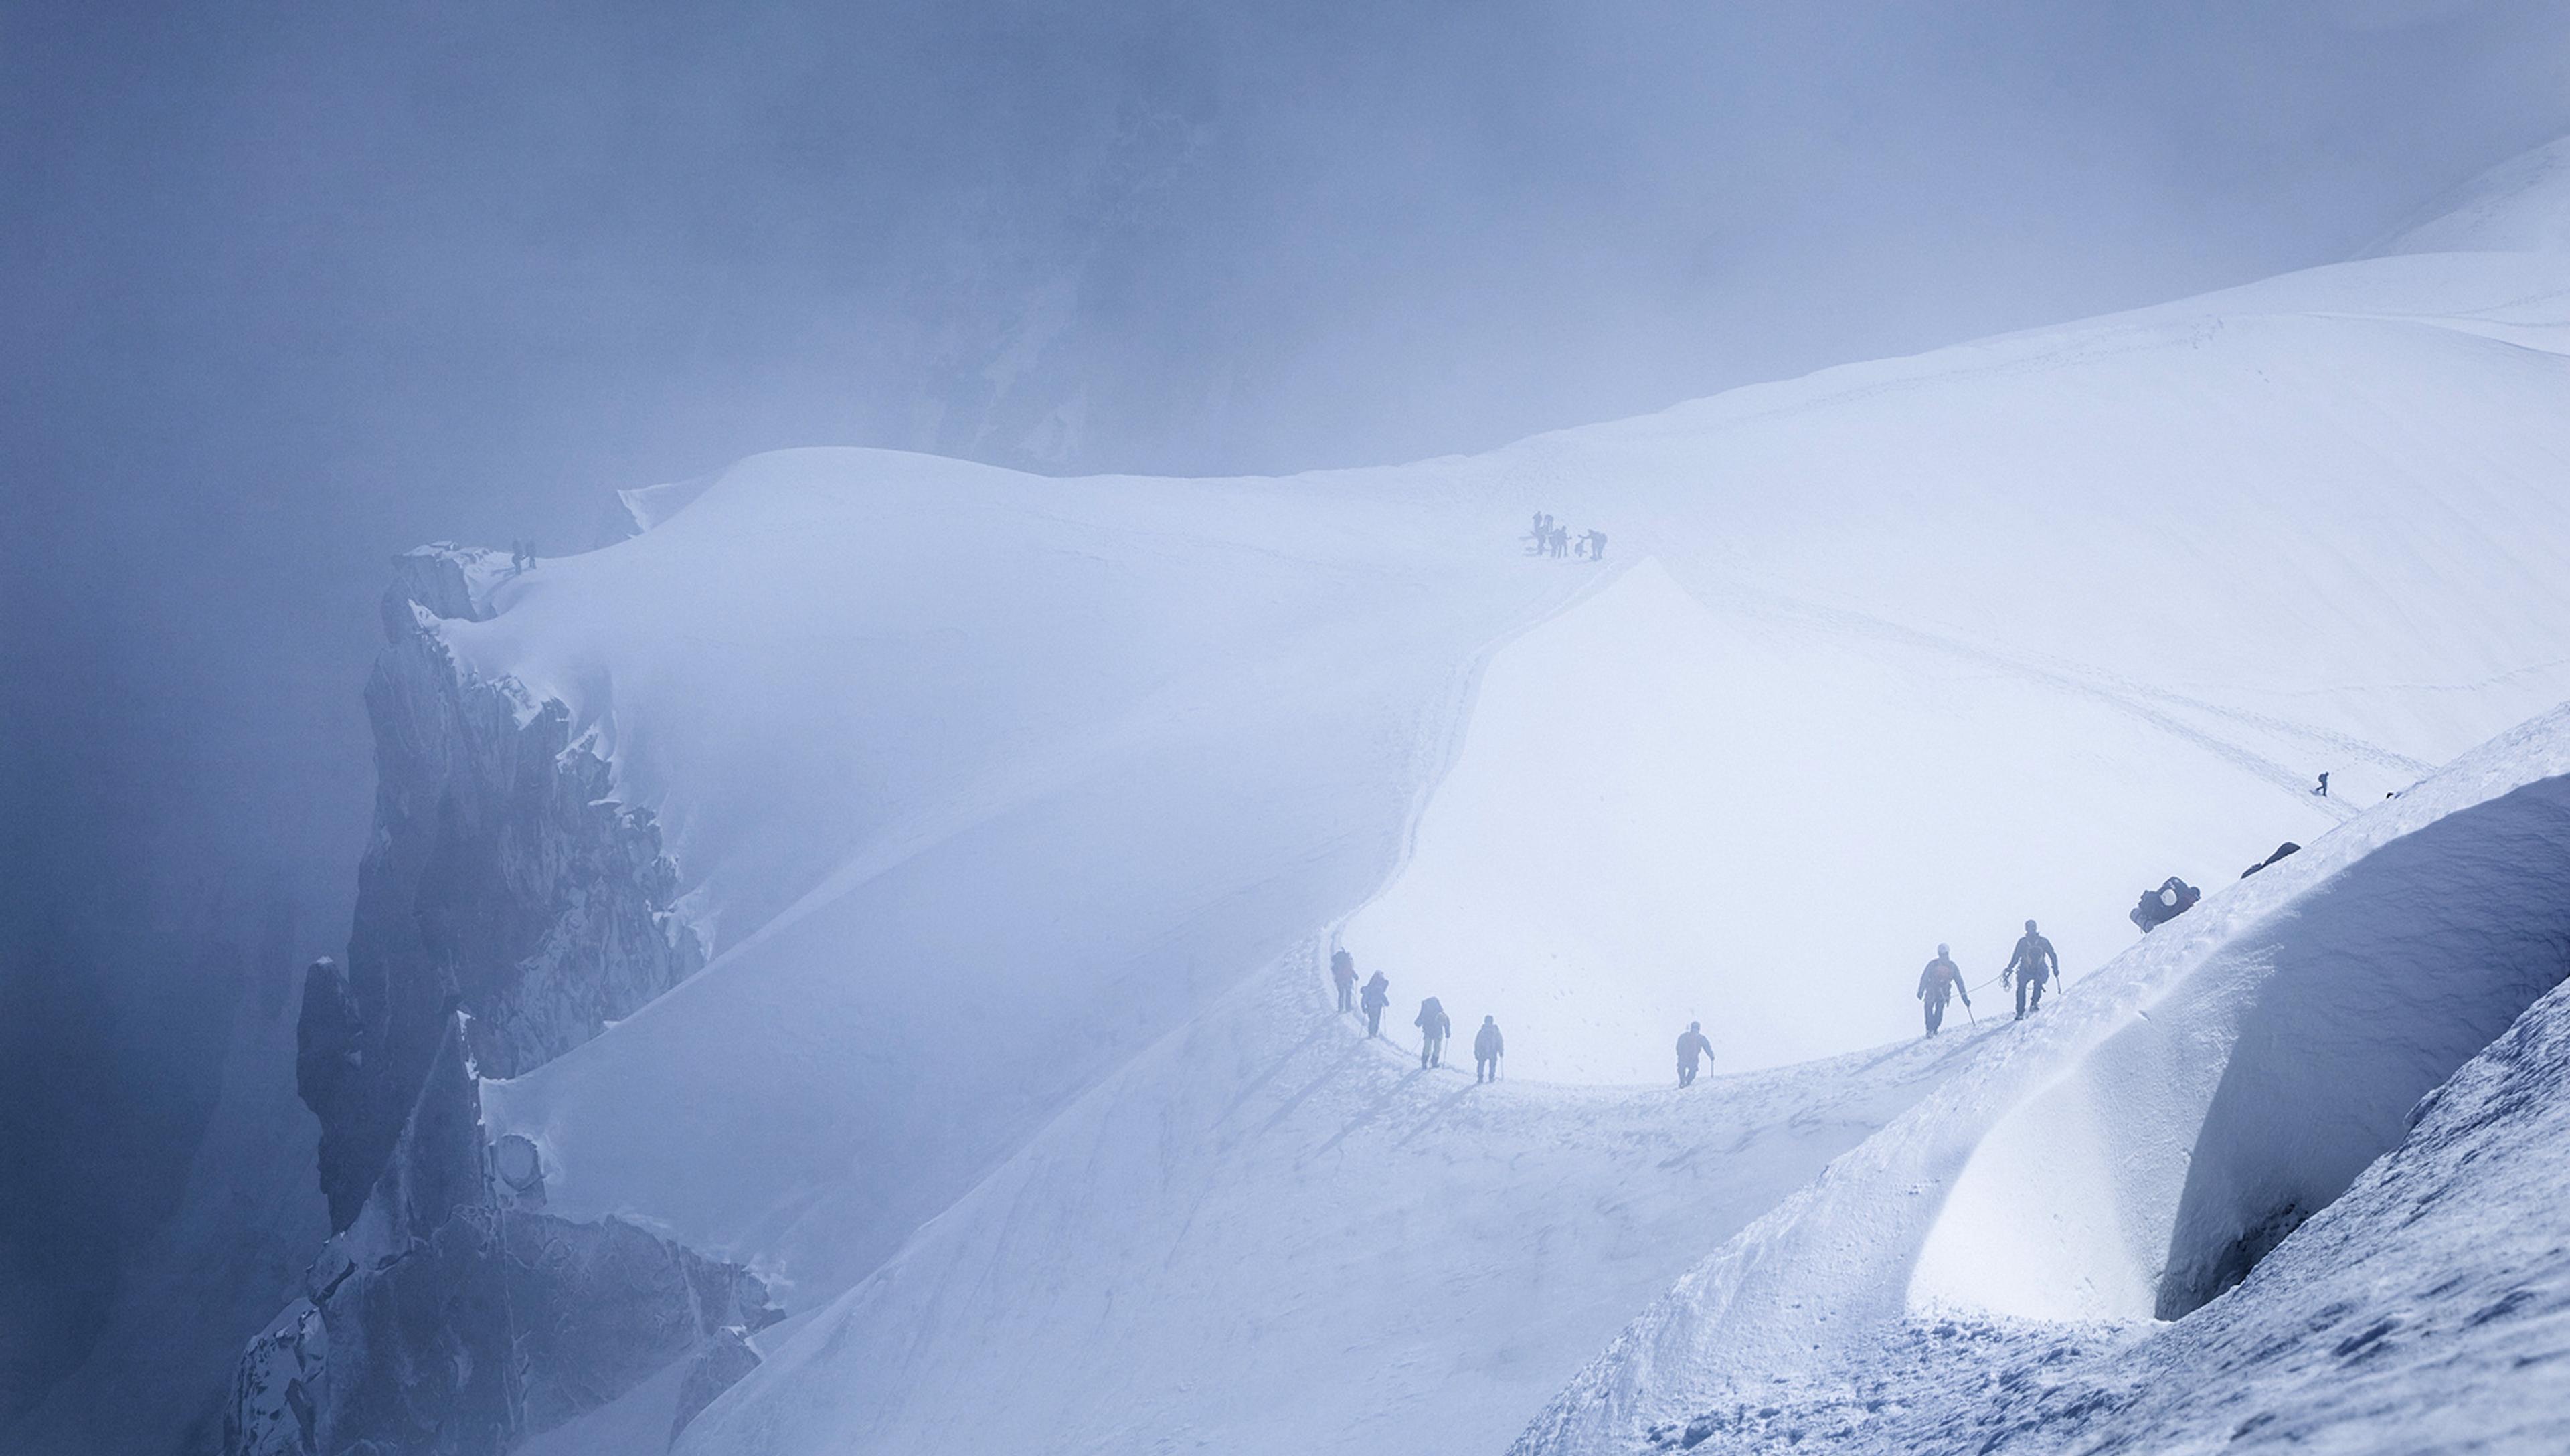 Several climbers trek across a snow-covered mountain ridge, enshrouded in mist, with rocky outcrops visible to the left. The path they follow is narrow and steep, demonstrating the challenging conditions of high-altitude mountaineering.